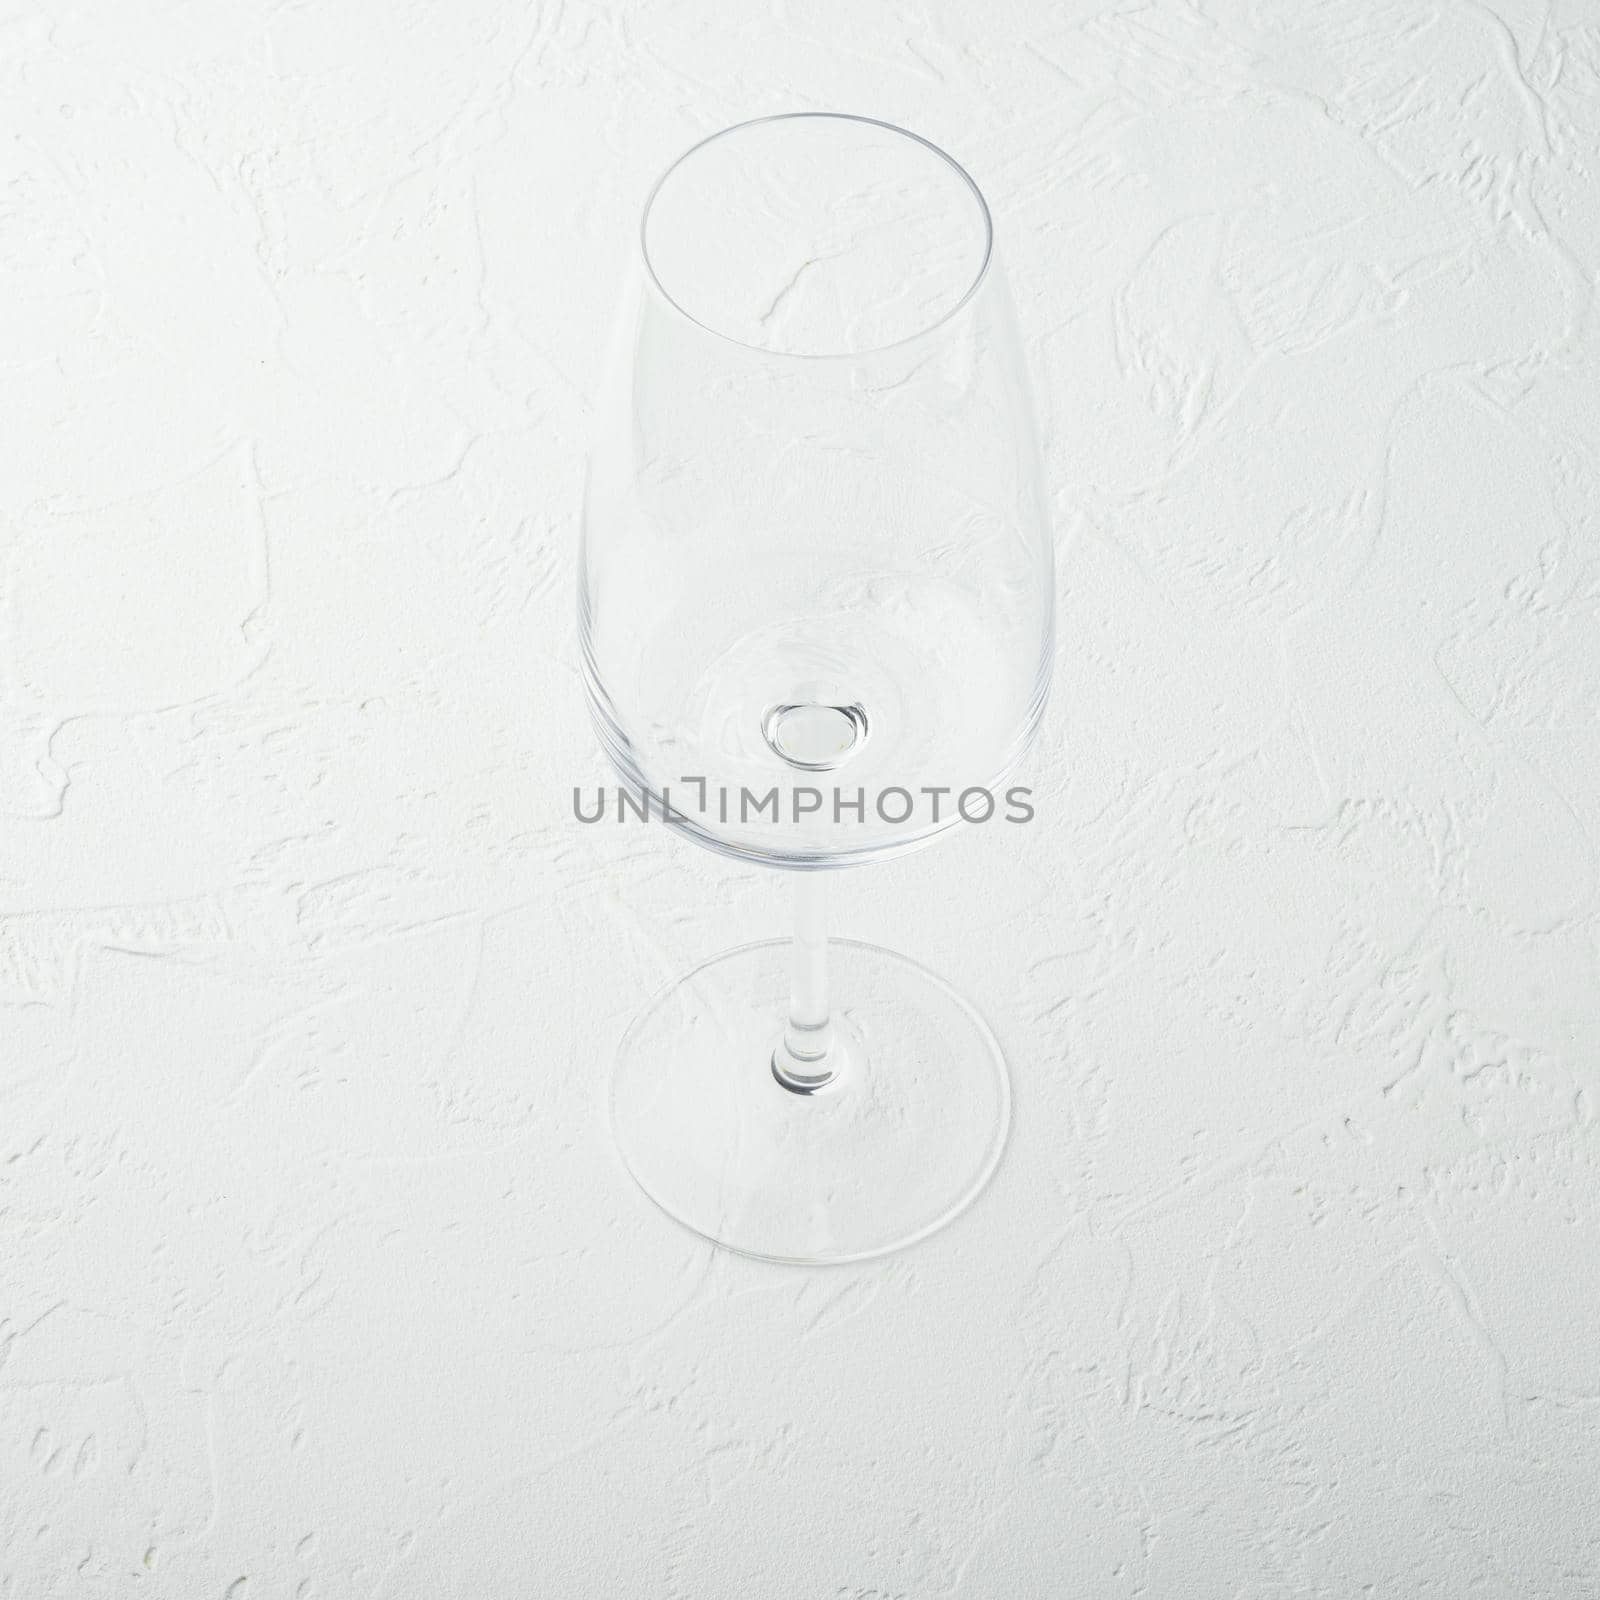 Clean wine glass, square format, on white stone background by Ilianesolenyi